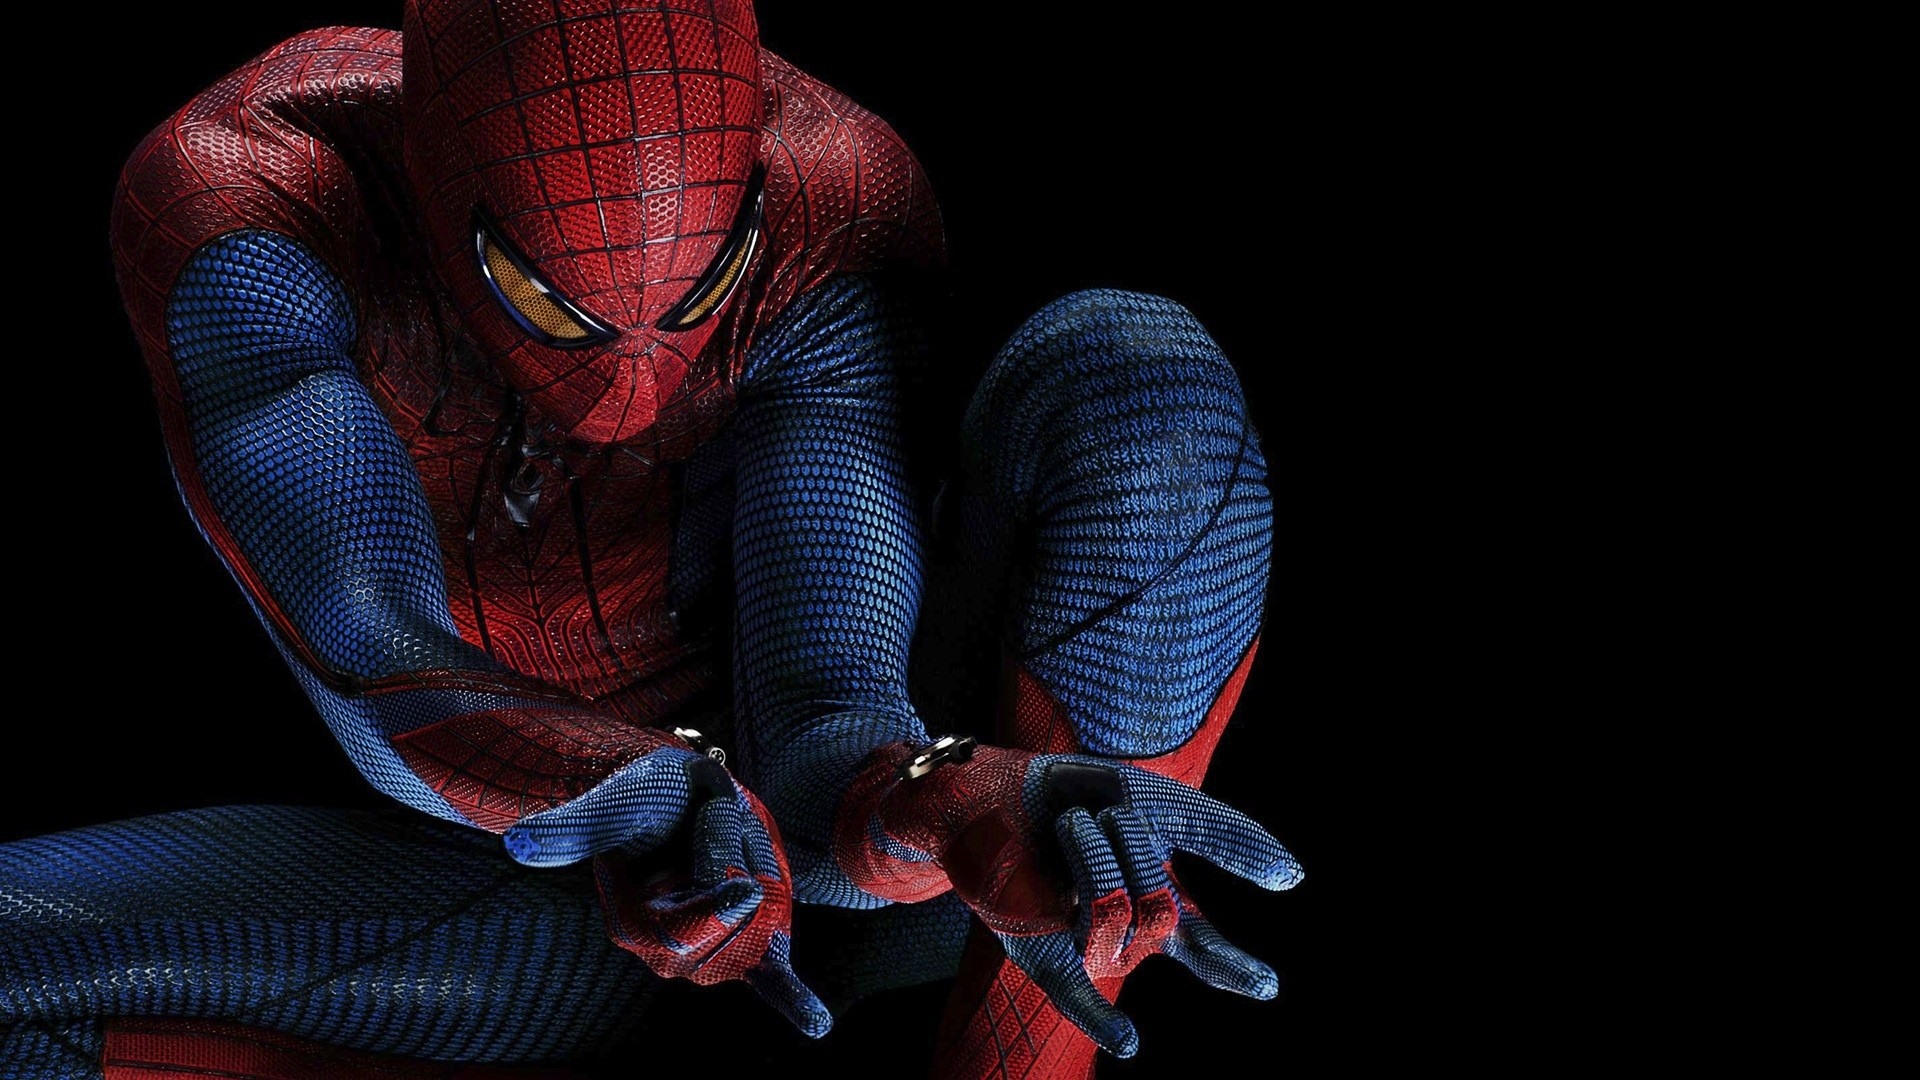 The Amazing Spider-Man 2012 wallpapers #16 - 1920x1080